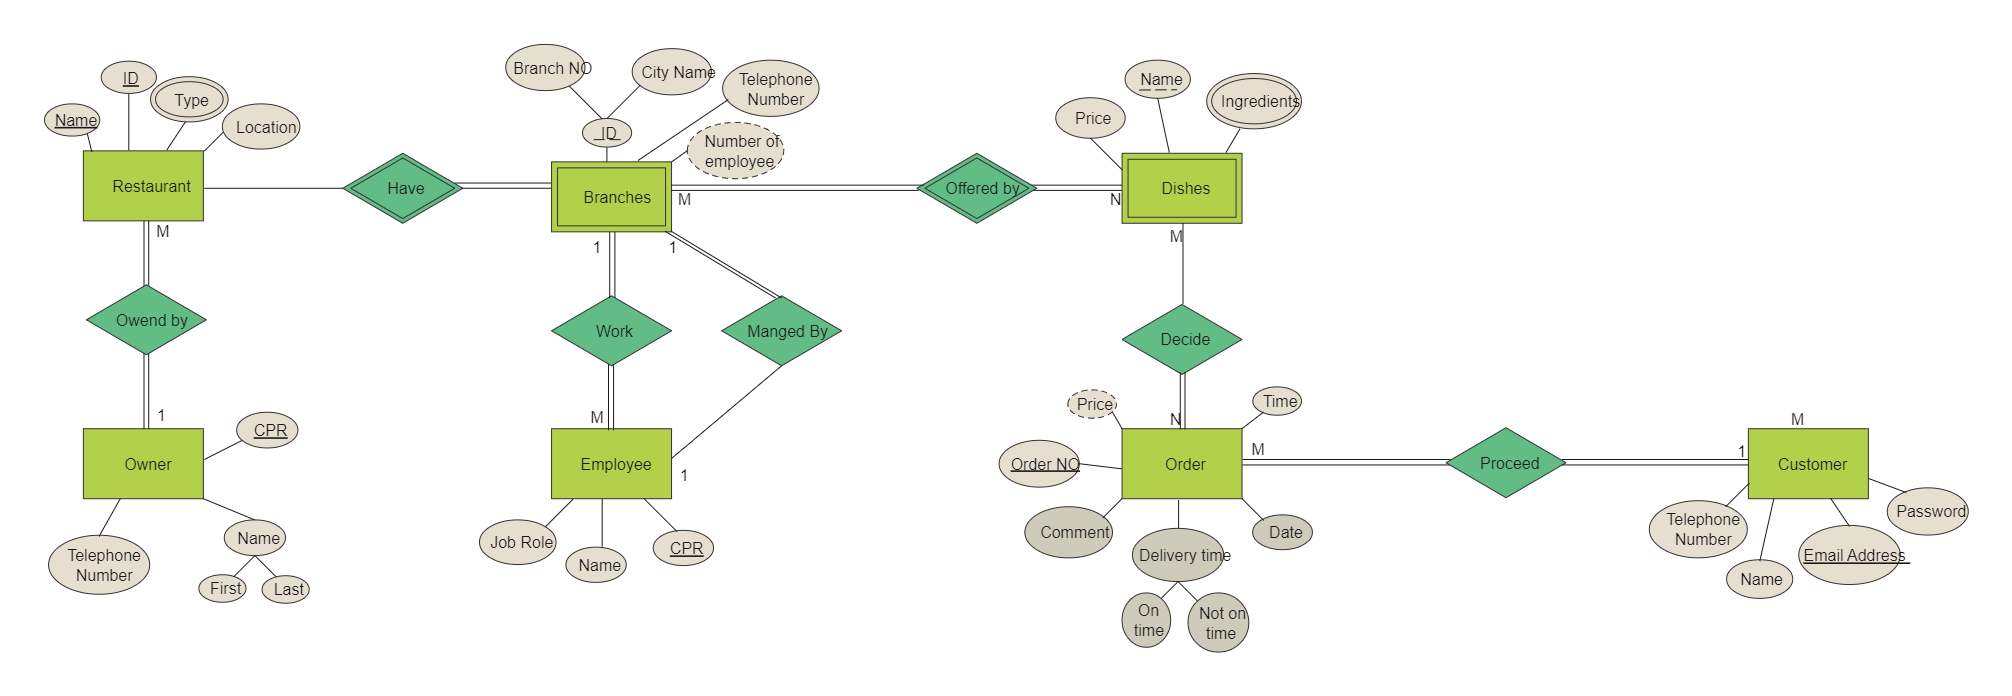 Here is an ER diagram about restaurant management, from which you can see the relations among the 7 roles. ER diagram depicts the relationship between two or more entities. This could be real-world entities or entity sets of a database. The model helps us